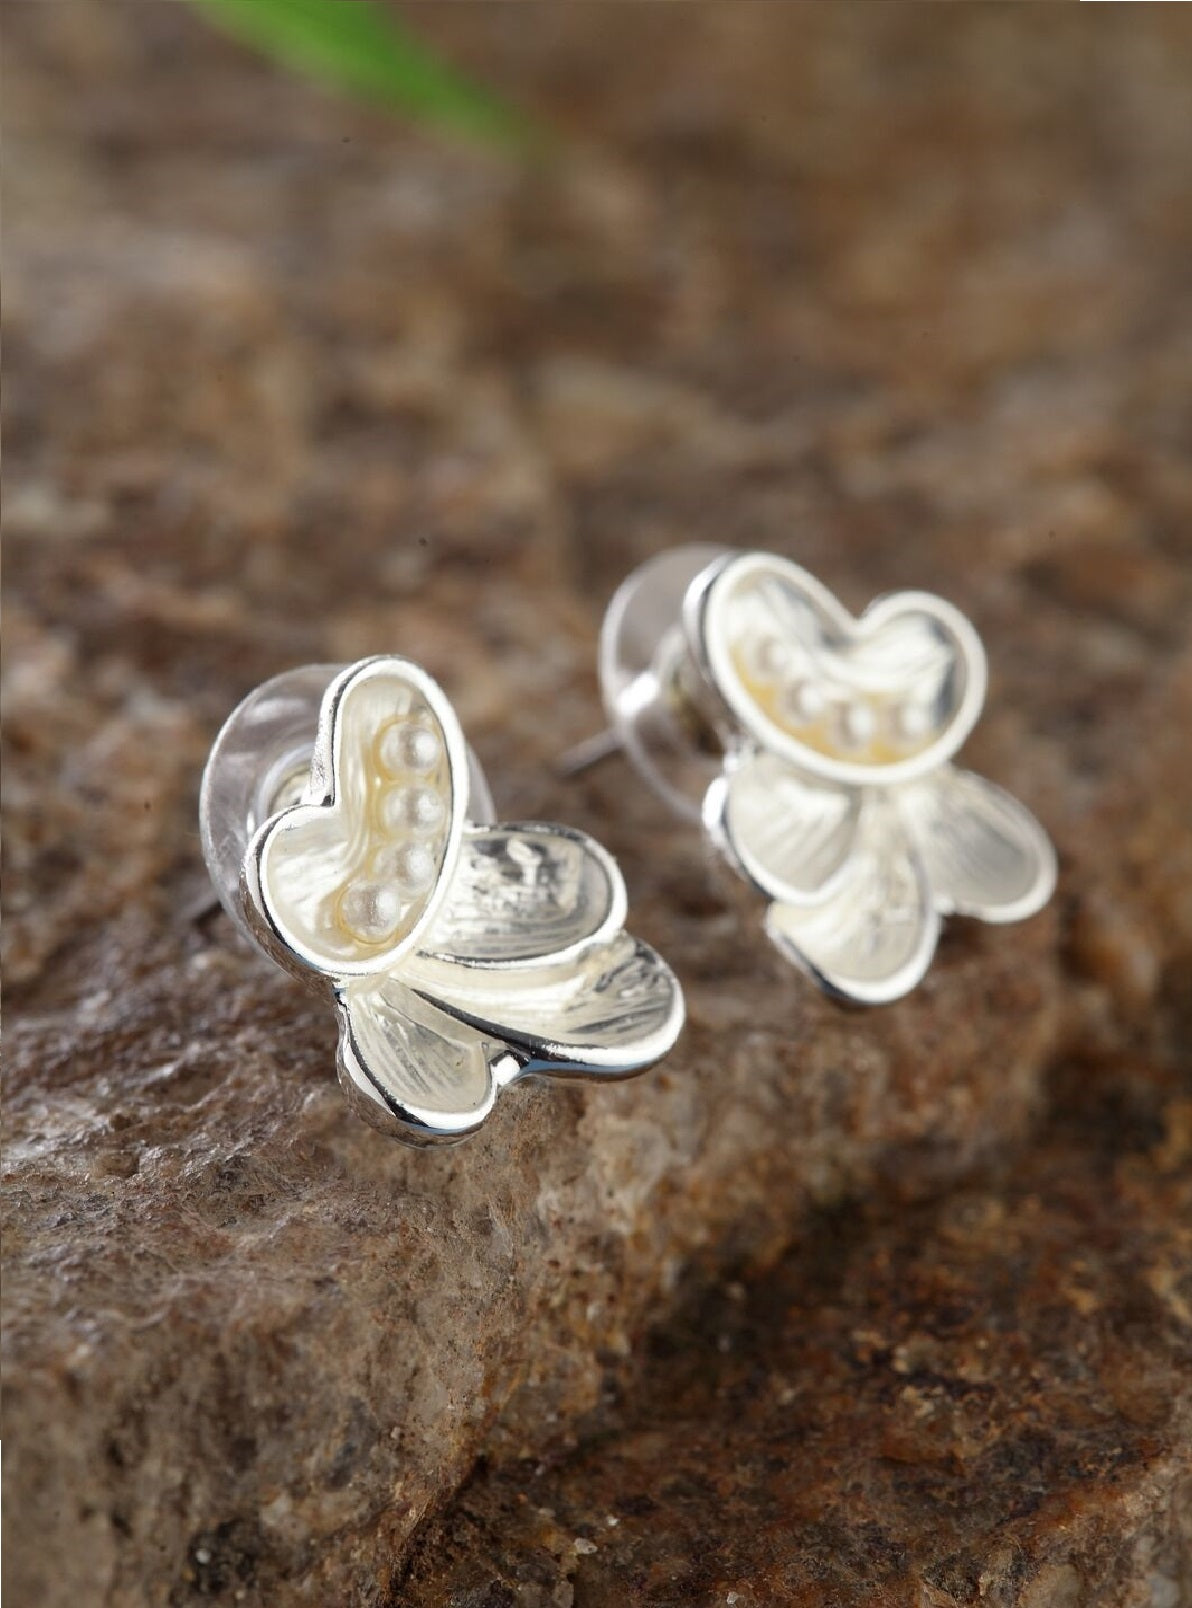 Cute Small Silver Earrings for Girls - Adorable Adornments for Every  Occasion